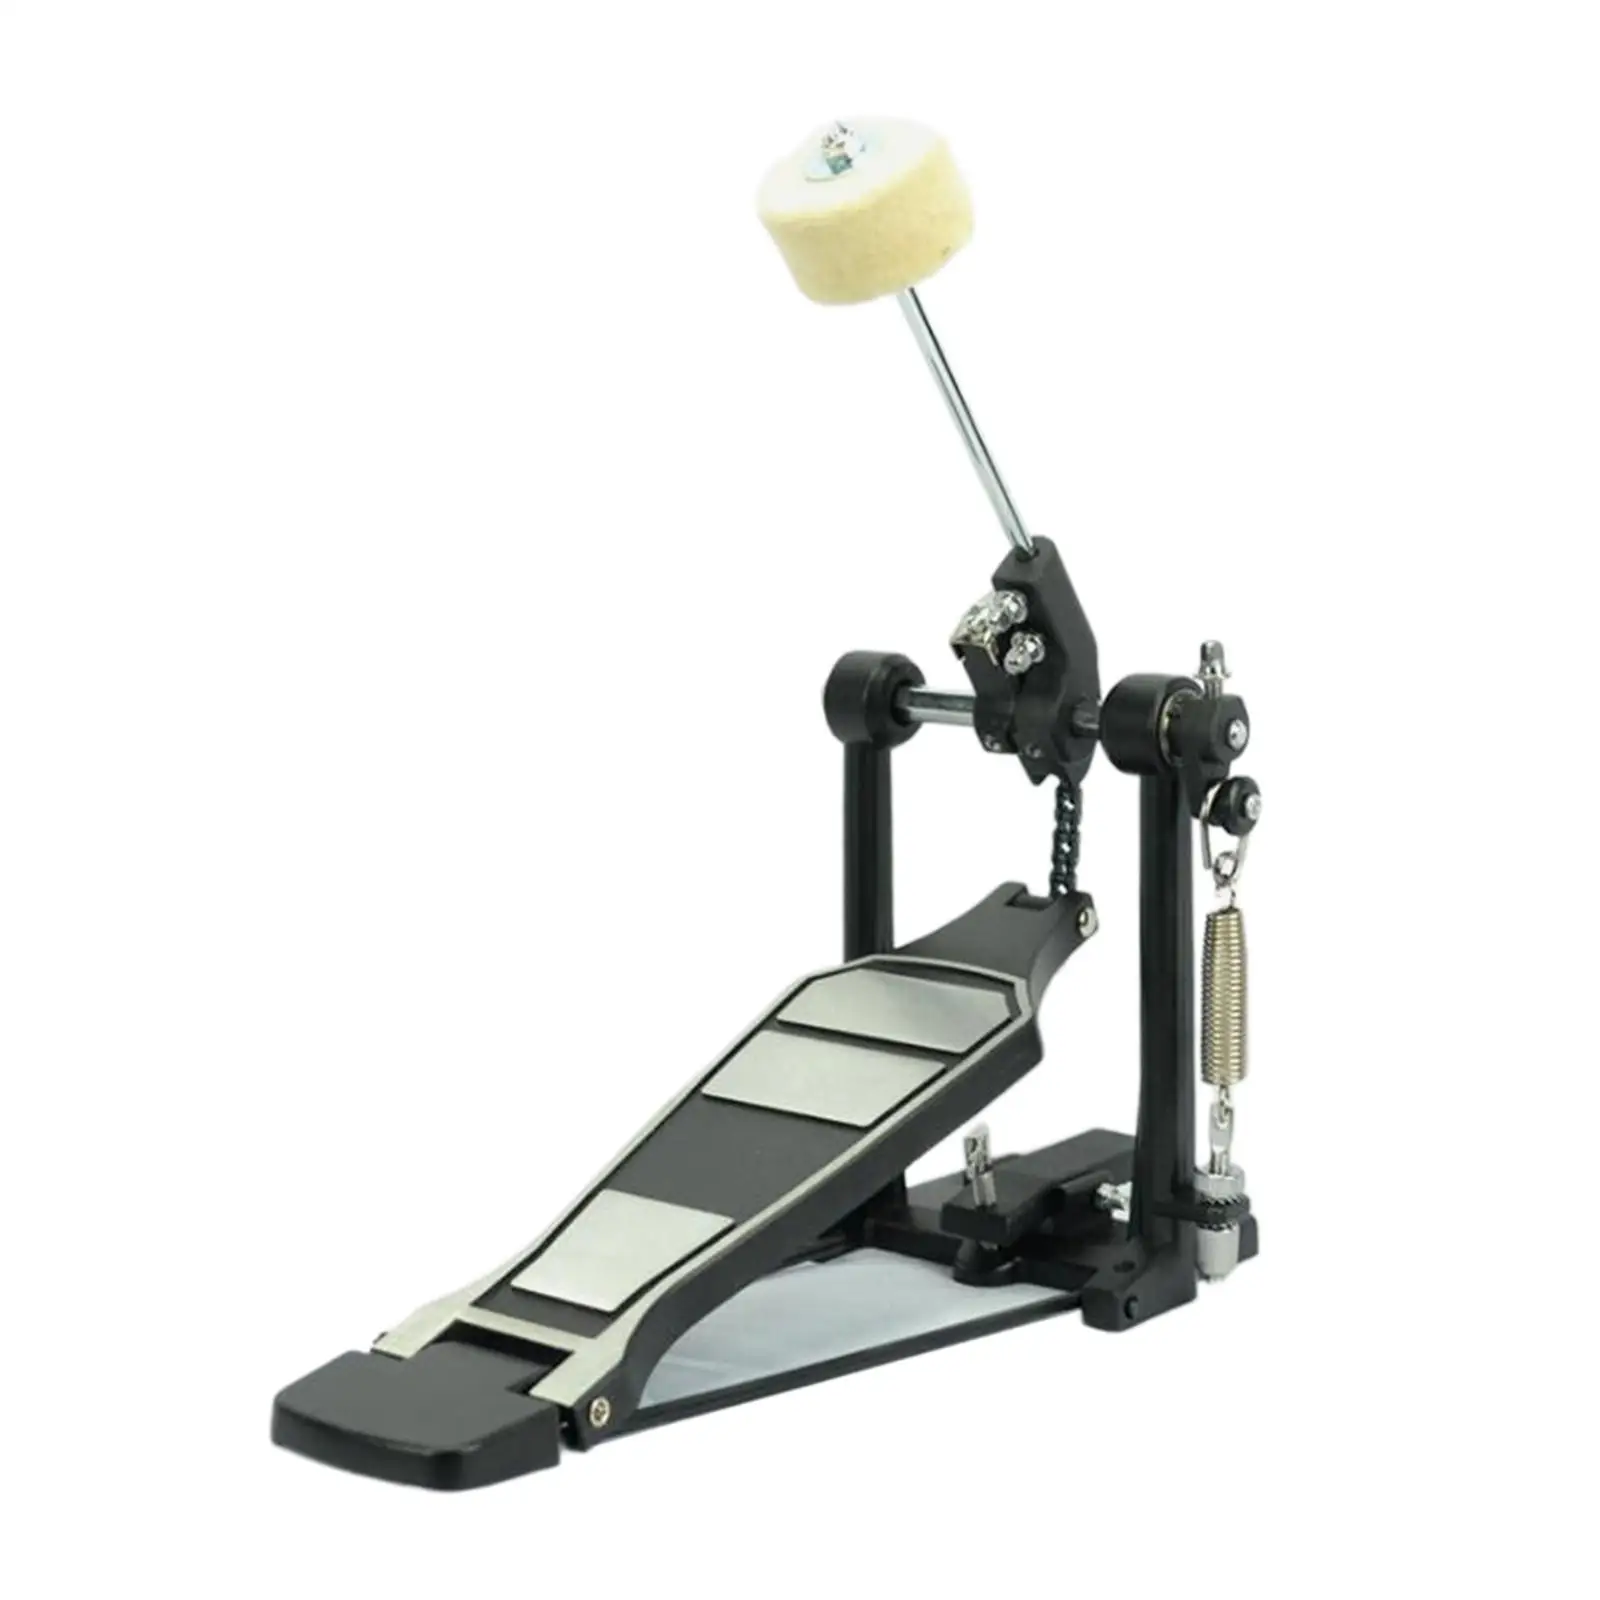 Bass Drum Pedal Portable Stable Chain Drive Drum Step for Drum Set Instrument for Electronic Drums Drum Foot Pedal Beater